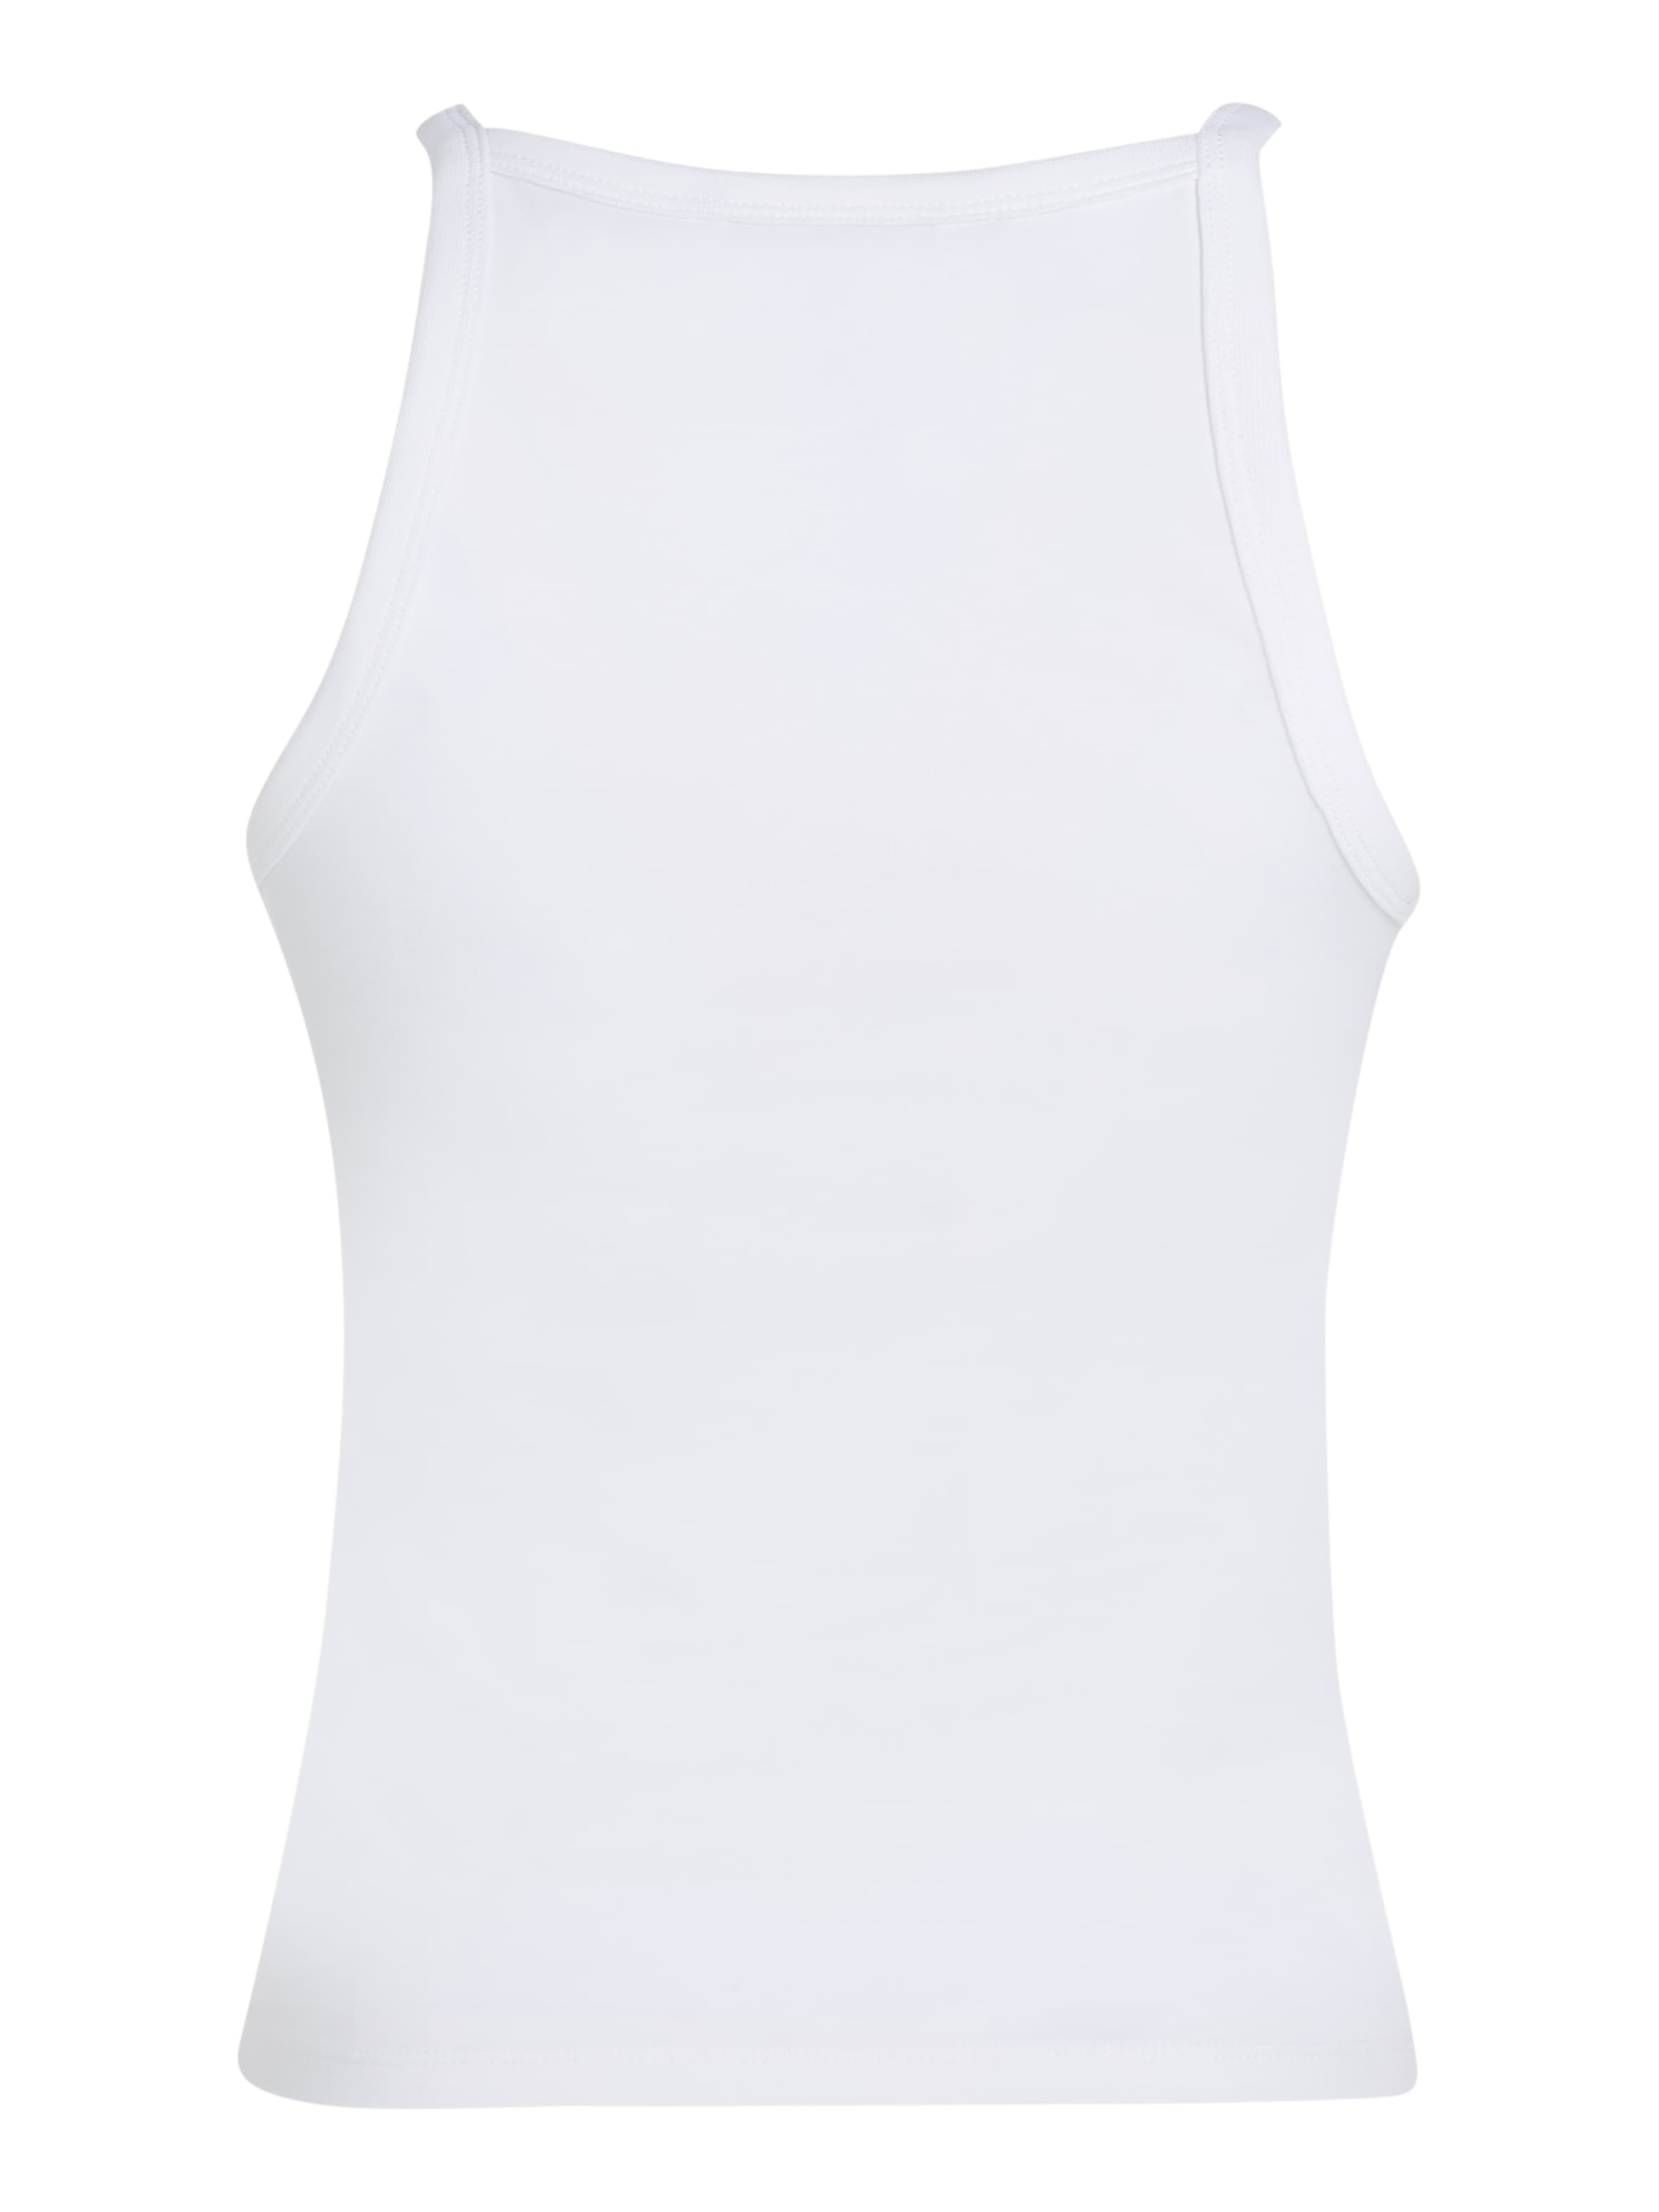 Calvin Klein Jeans Spaghettitop »OUTLINED CK STRAPPY TANK«, mit Markenlabel